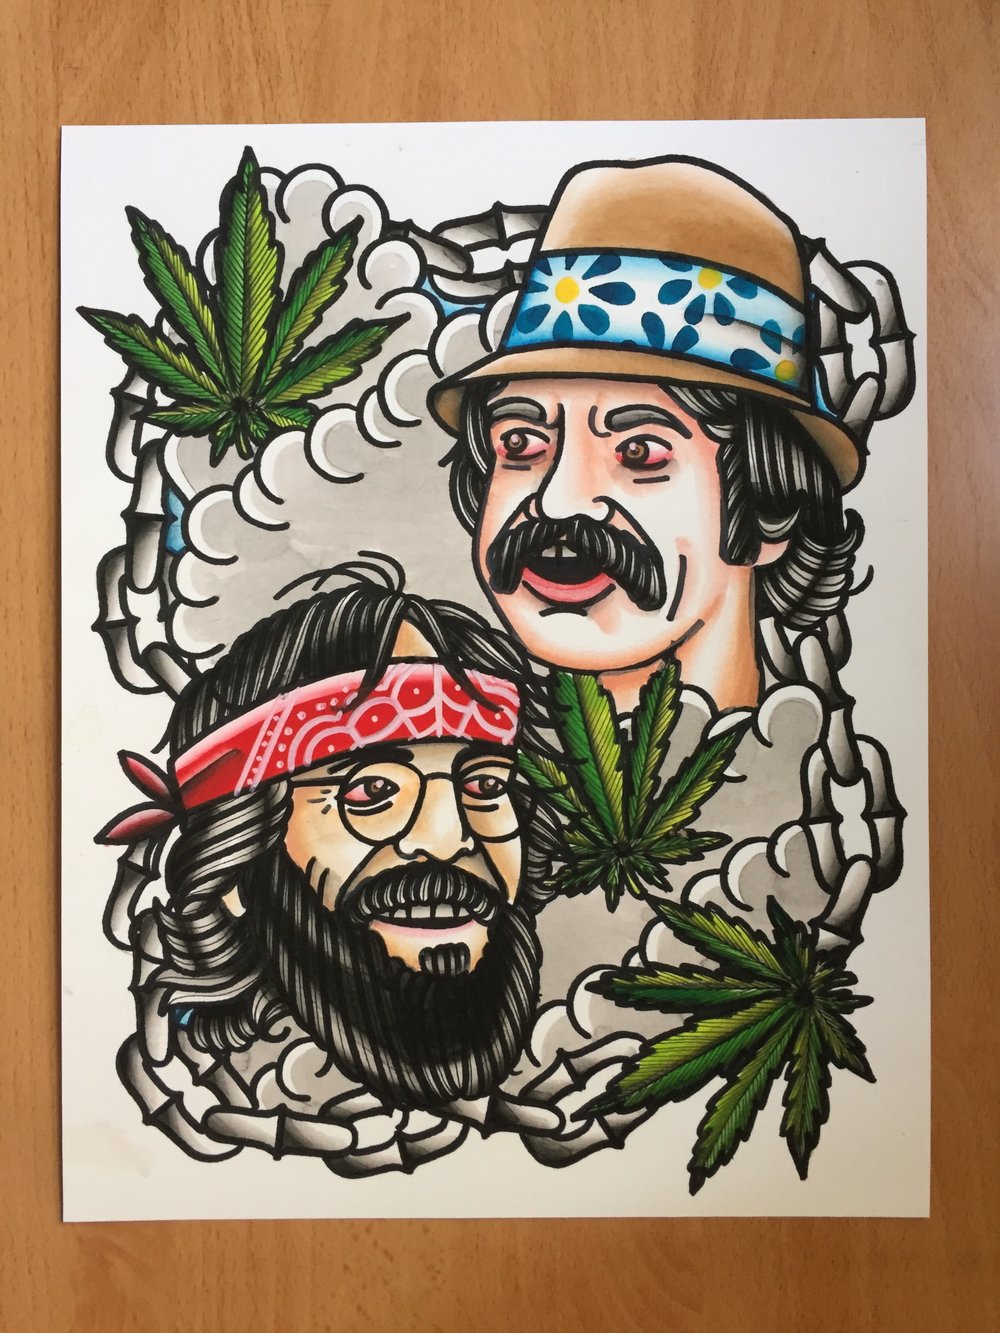 Image of "Up in Smoke" Print